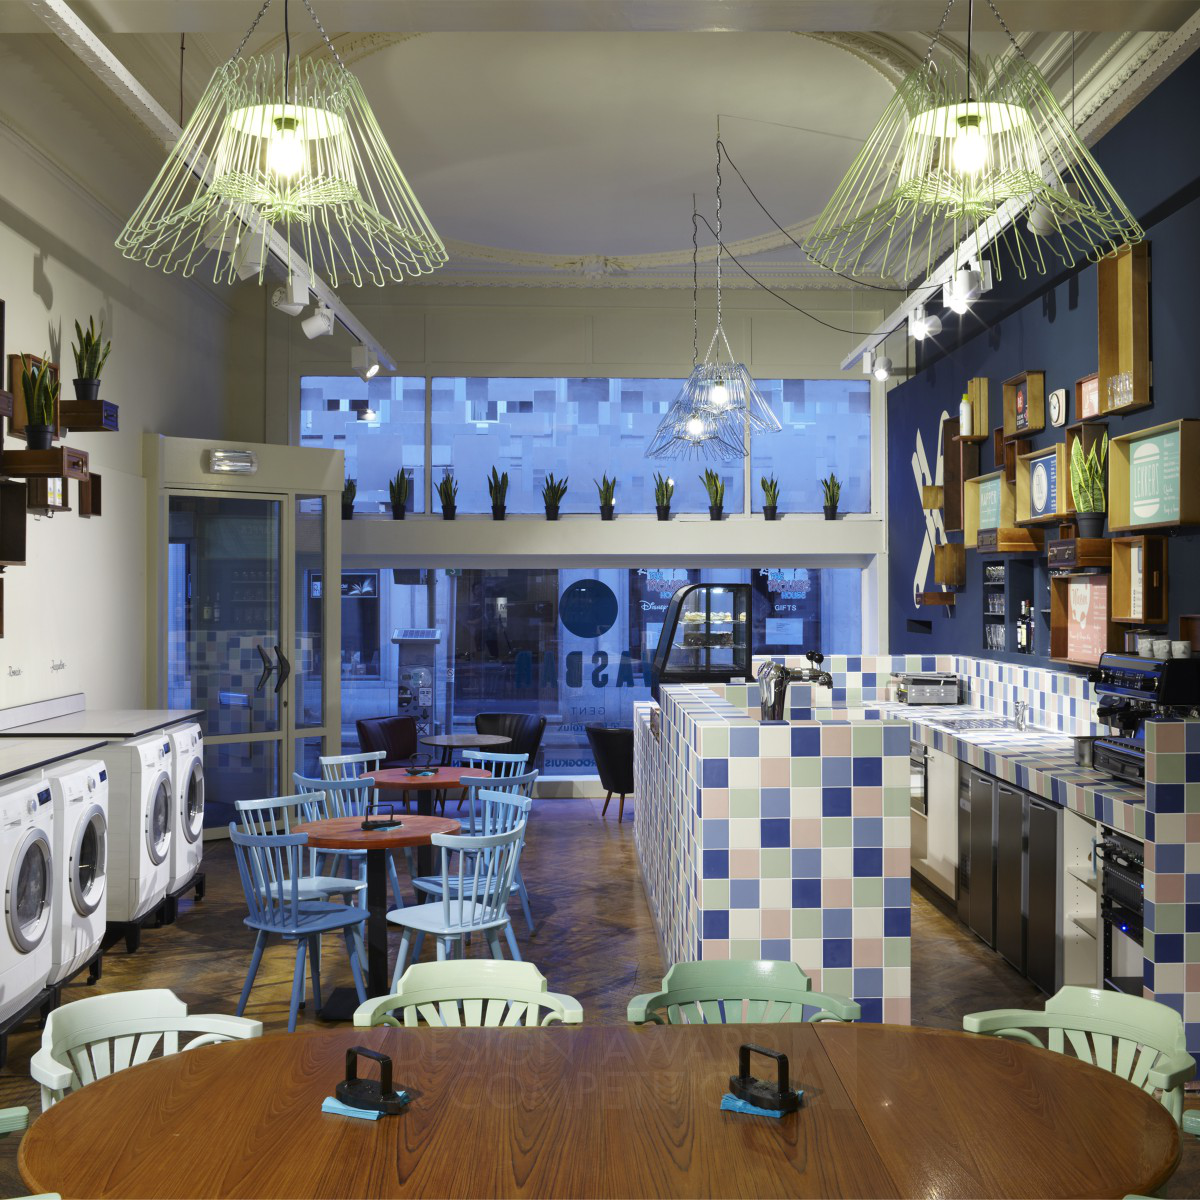 Wasbar Laundromat by Ruud Belmans